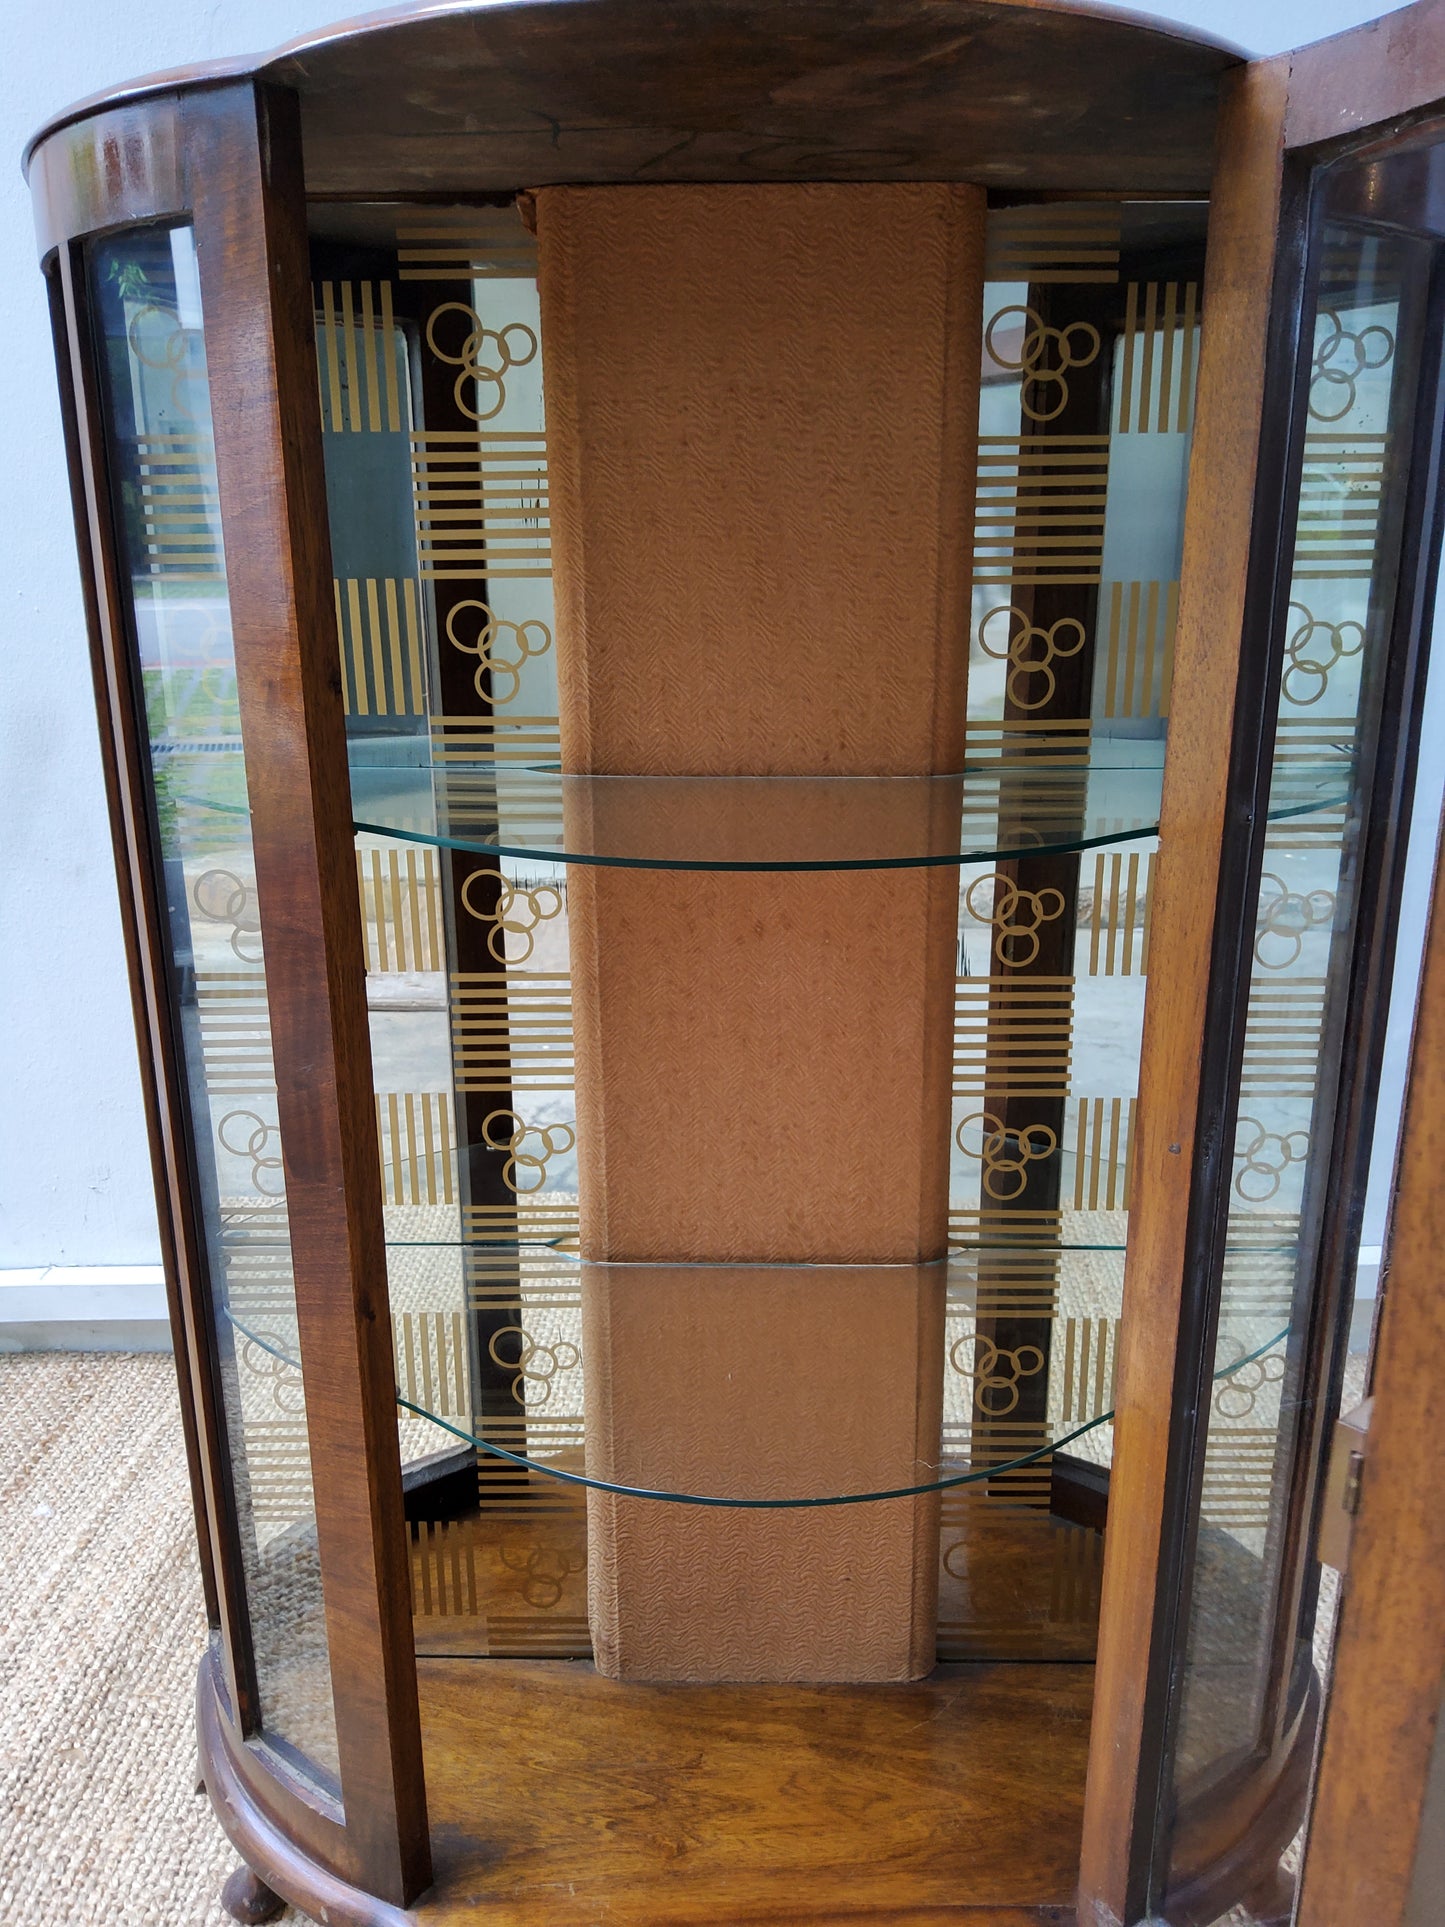 Display cabinet with glass shelves